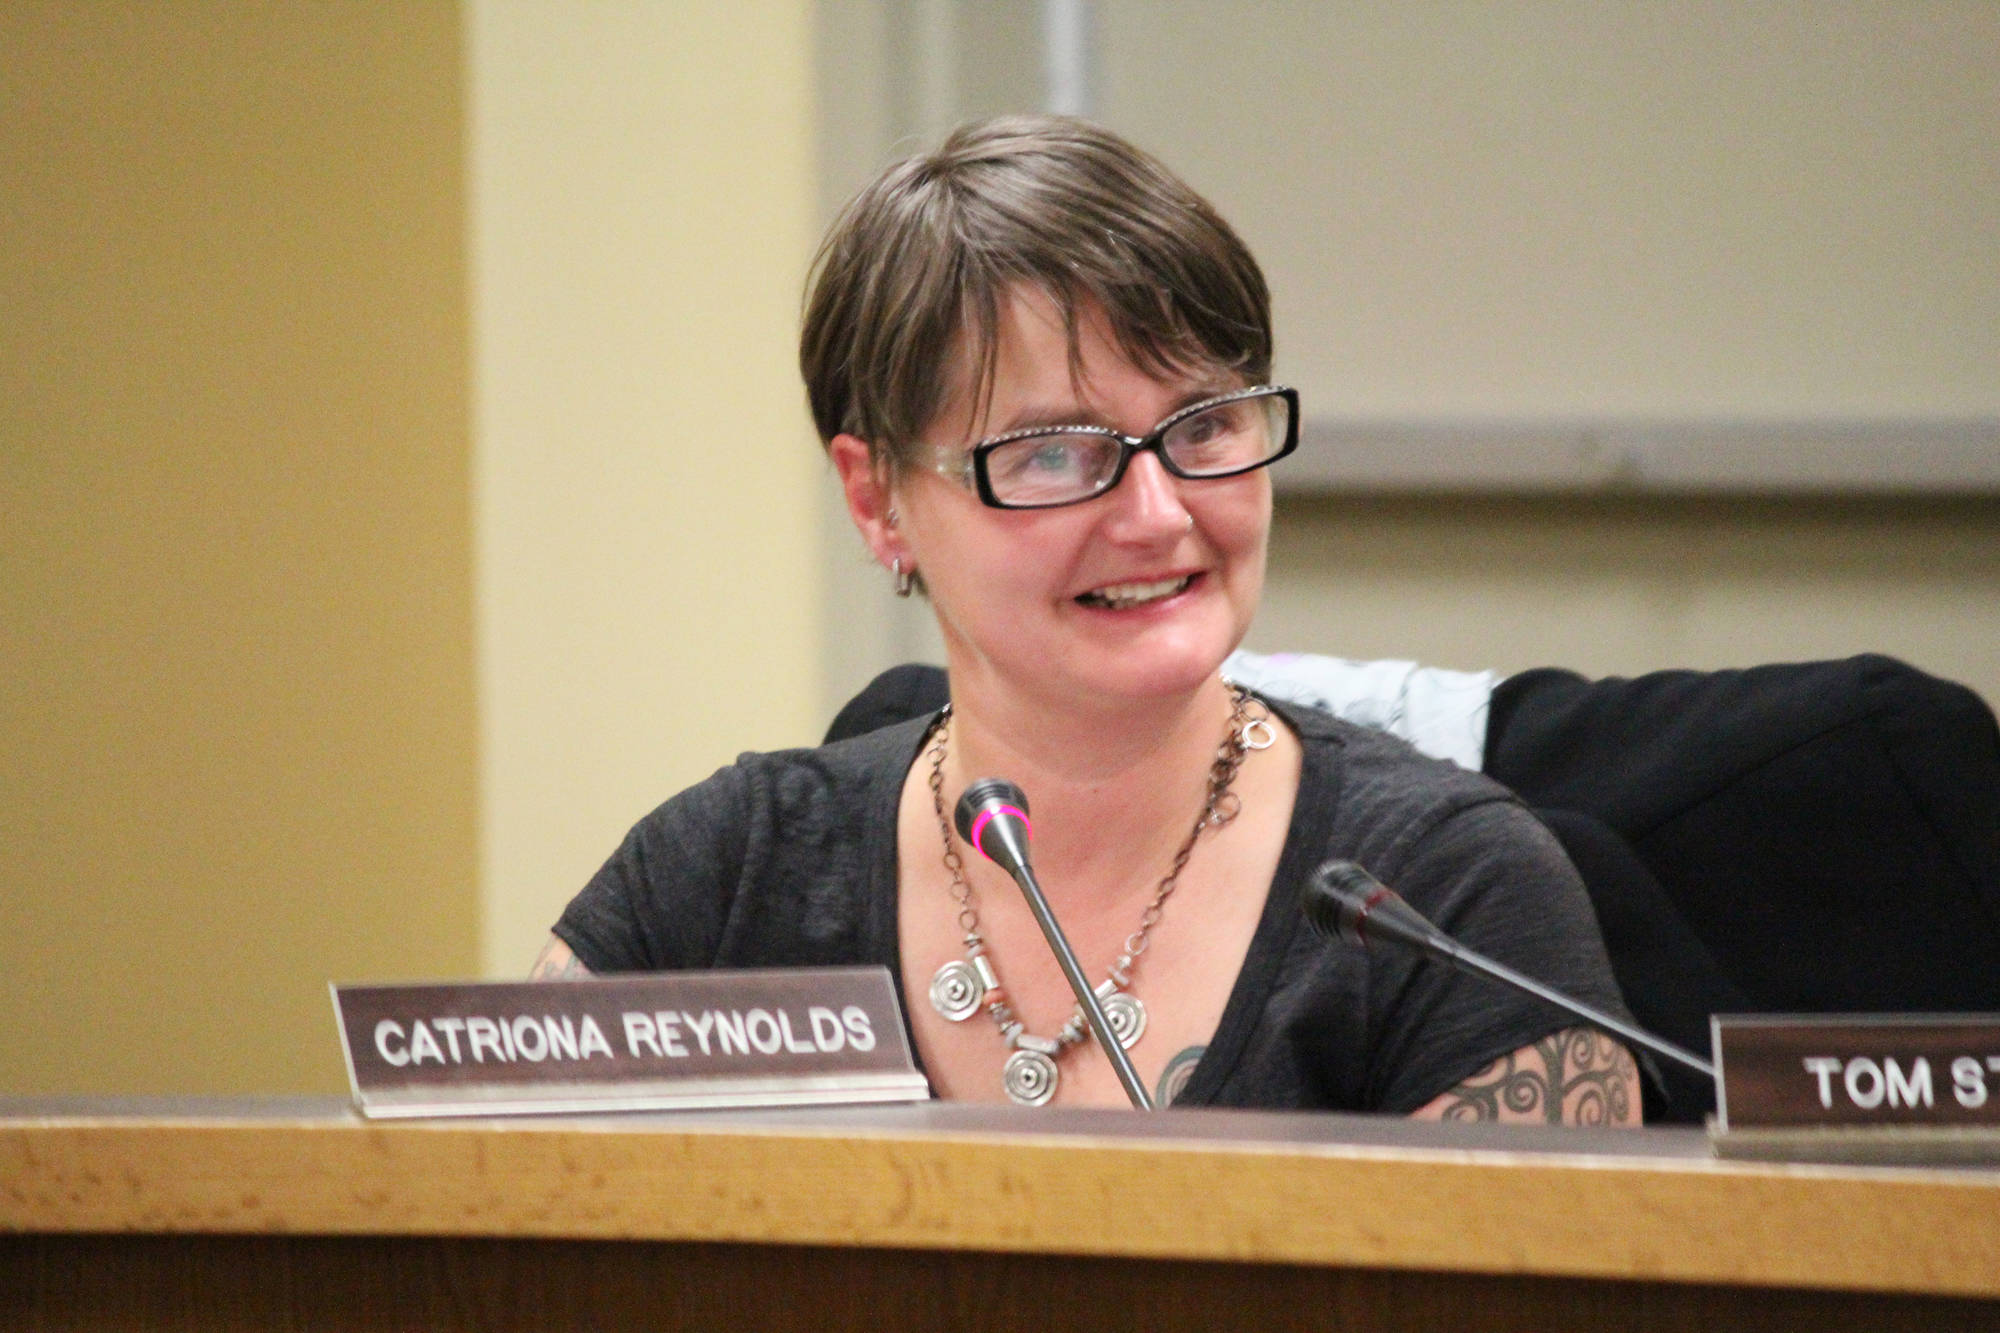 Catriona Reynolds, who served on the Homer City Council for three years, makes her closing remarks at her last meeting Monday, Oct. 9, 2017 in Cowles Council Chambers in Homer, Alaska. (Photo by Megan Pacer/Homer News)